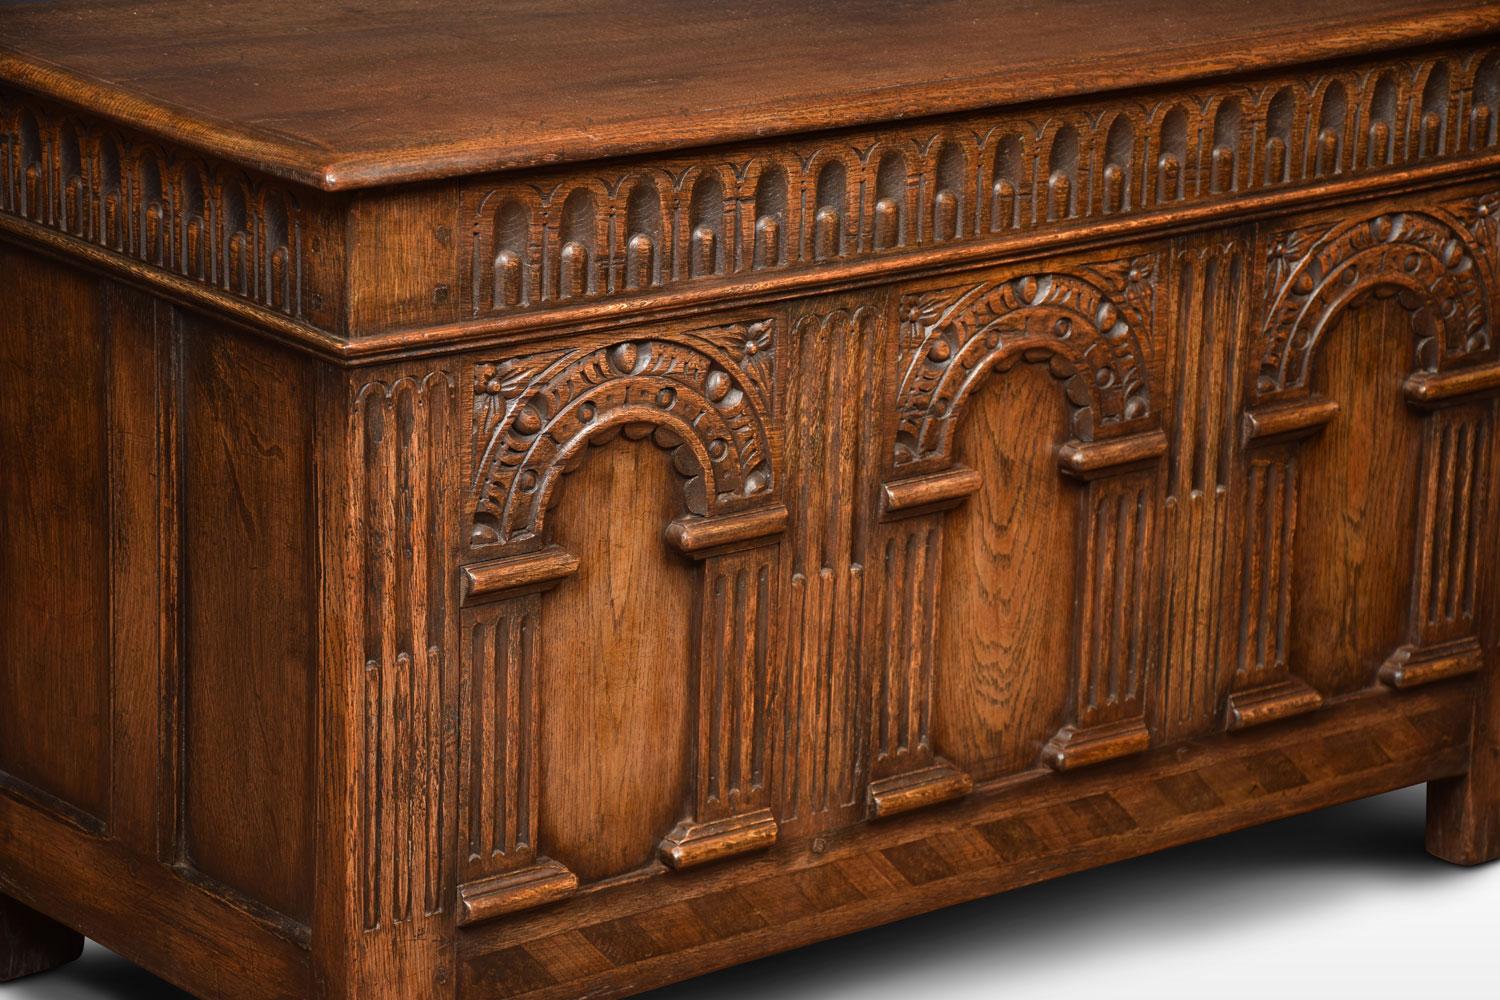 Oak coffer or blanket chest, the large rectangular hinged lid opening to reveal large storage facility. Above an arcaded frieze and three arched panels. All raised up on stile feet.
Dimensions:
Height 24.5 inches
Width 42 inches
Depth 18 inches.